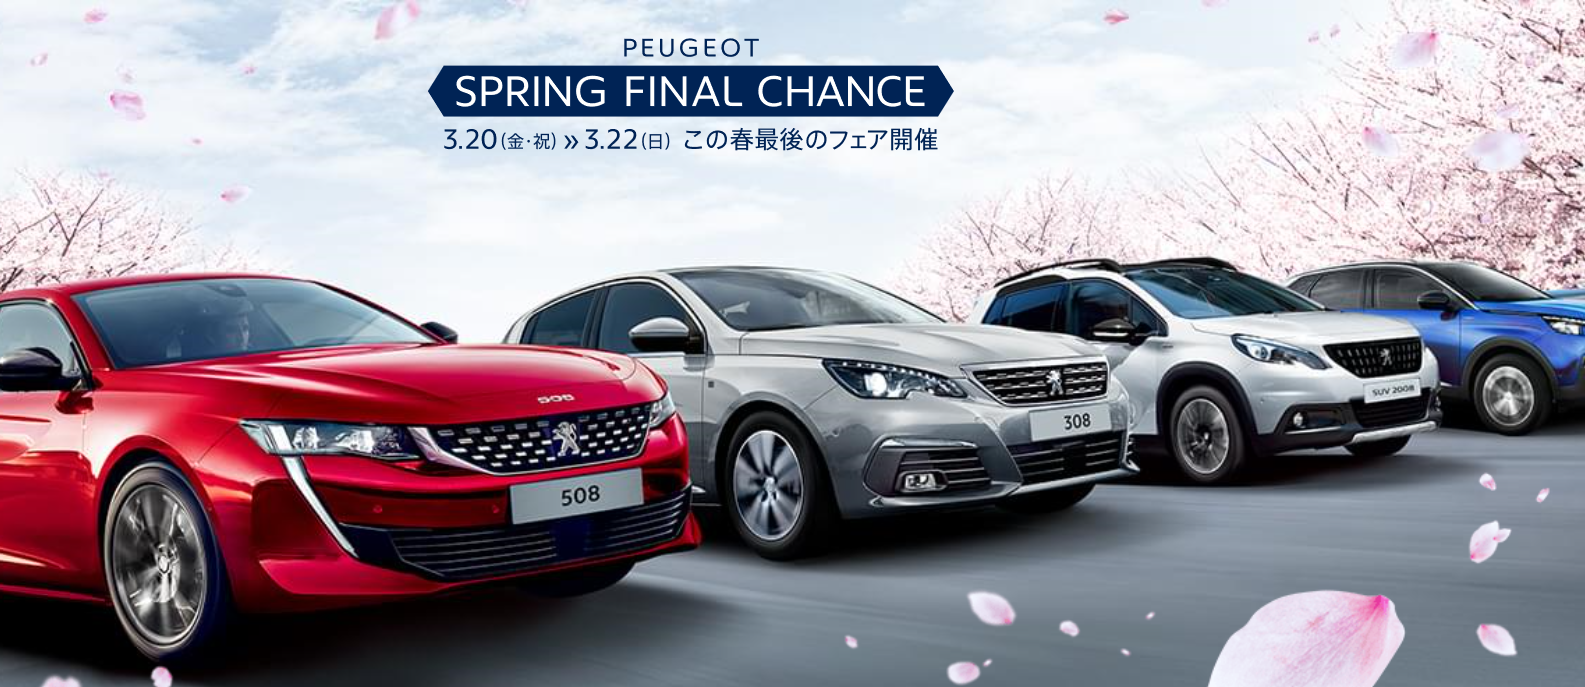 ☆PEUGEOT SPRING FINAL CHANCE☆